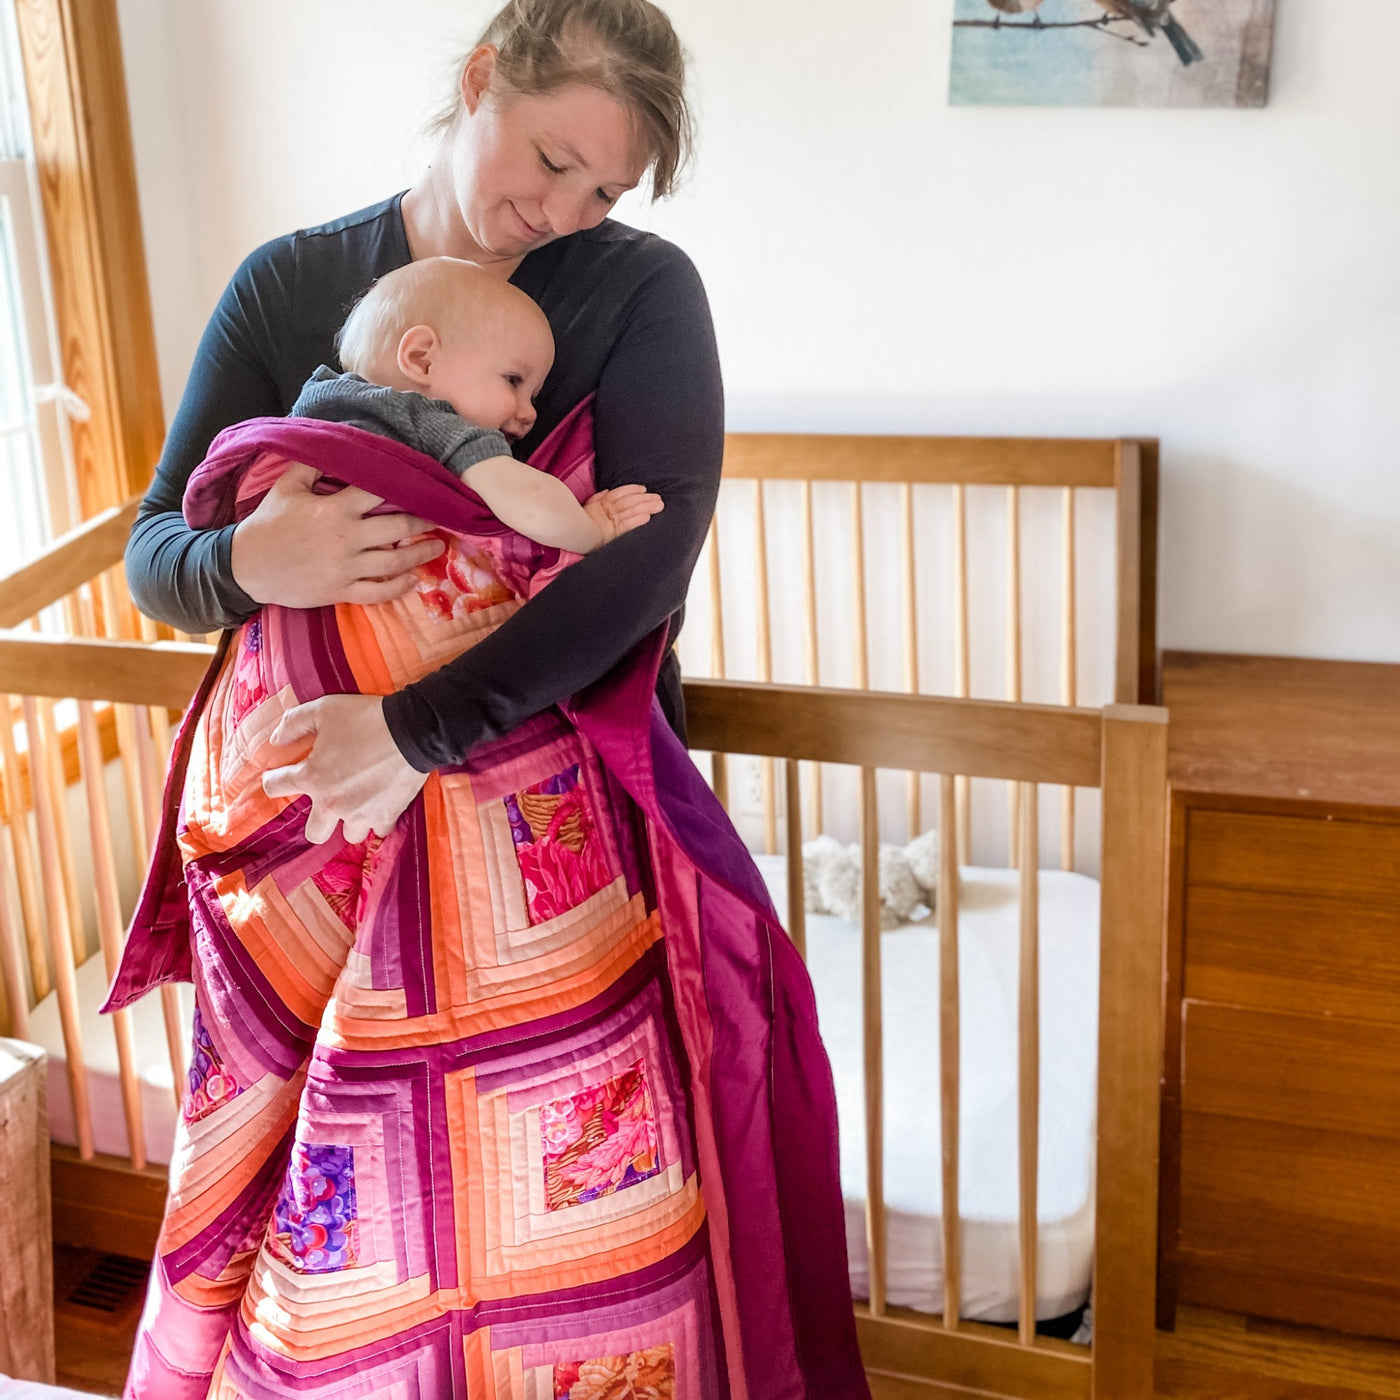 A mom and baby snuggled in A brightly colored purple and orange colored quilt. It is a handmade, patchwork, log cabin style lap quilt